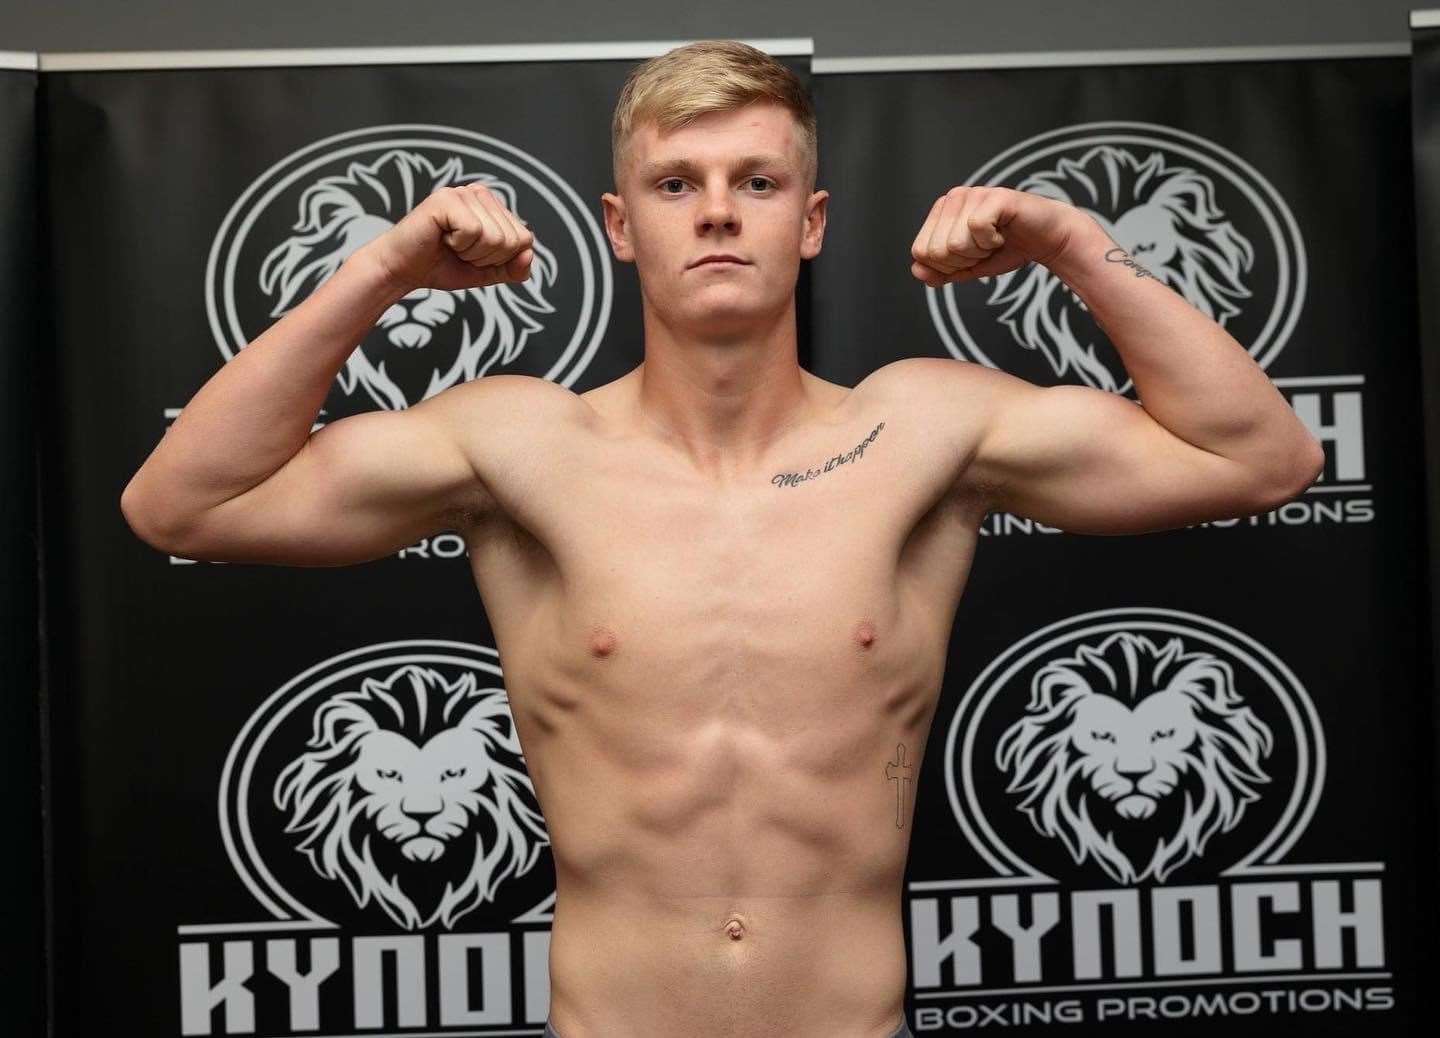 Fraser Wilkinson came through his weigh-in for tonight's fight. Kynoch Boxing Scotland.